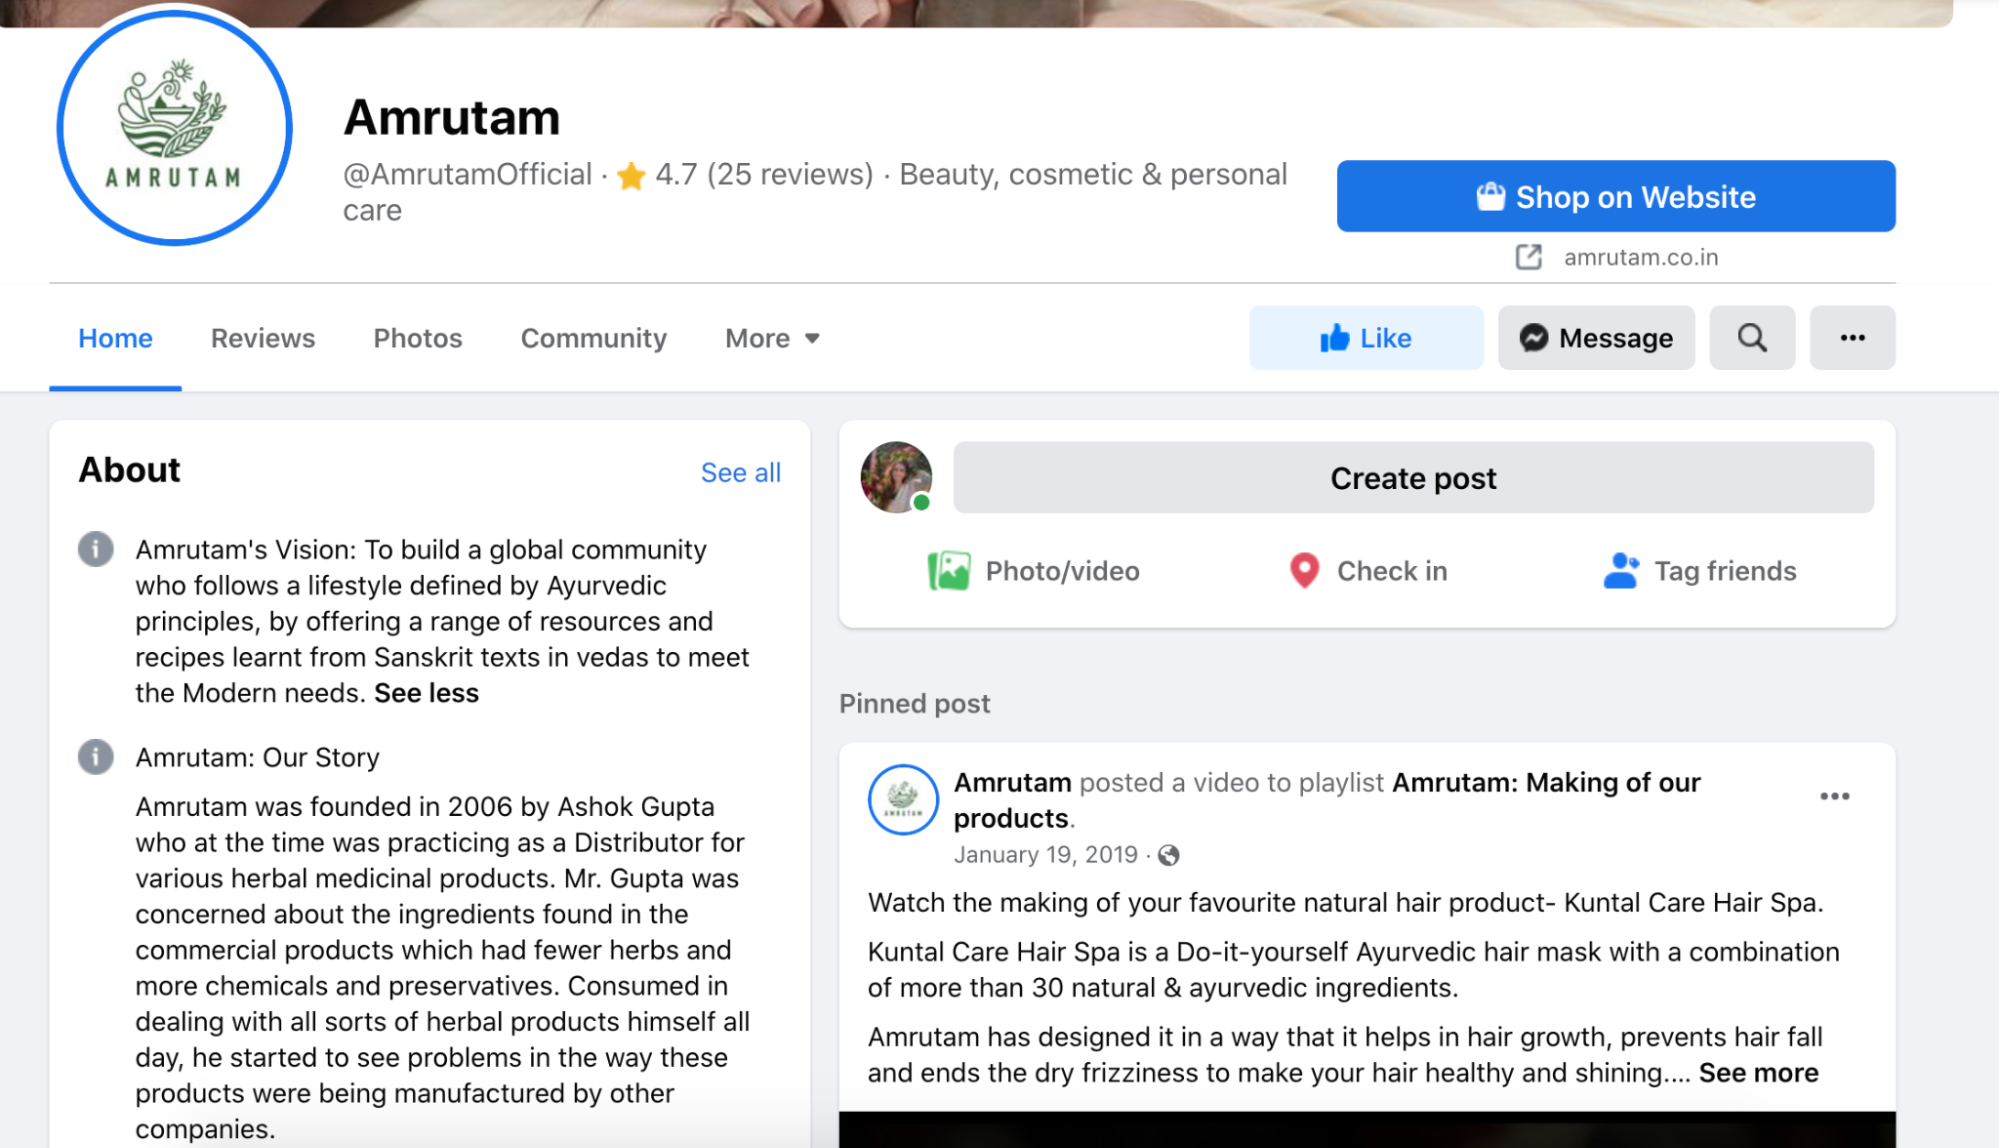 Facebook profile for Amrutam that shares the brand’s story and vision.